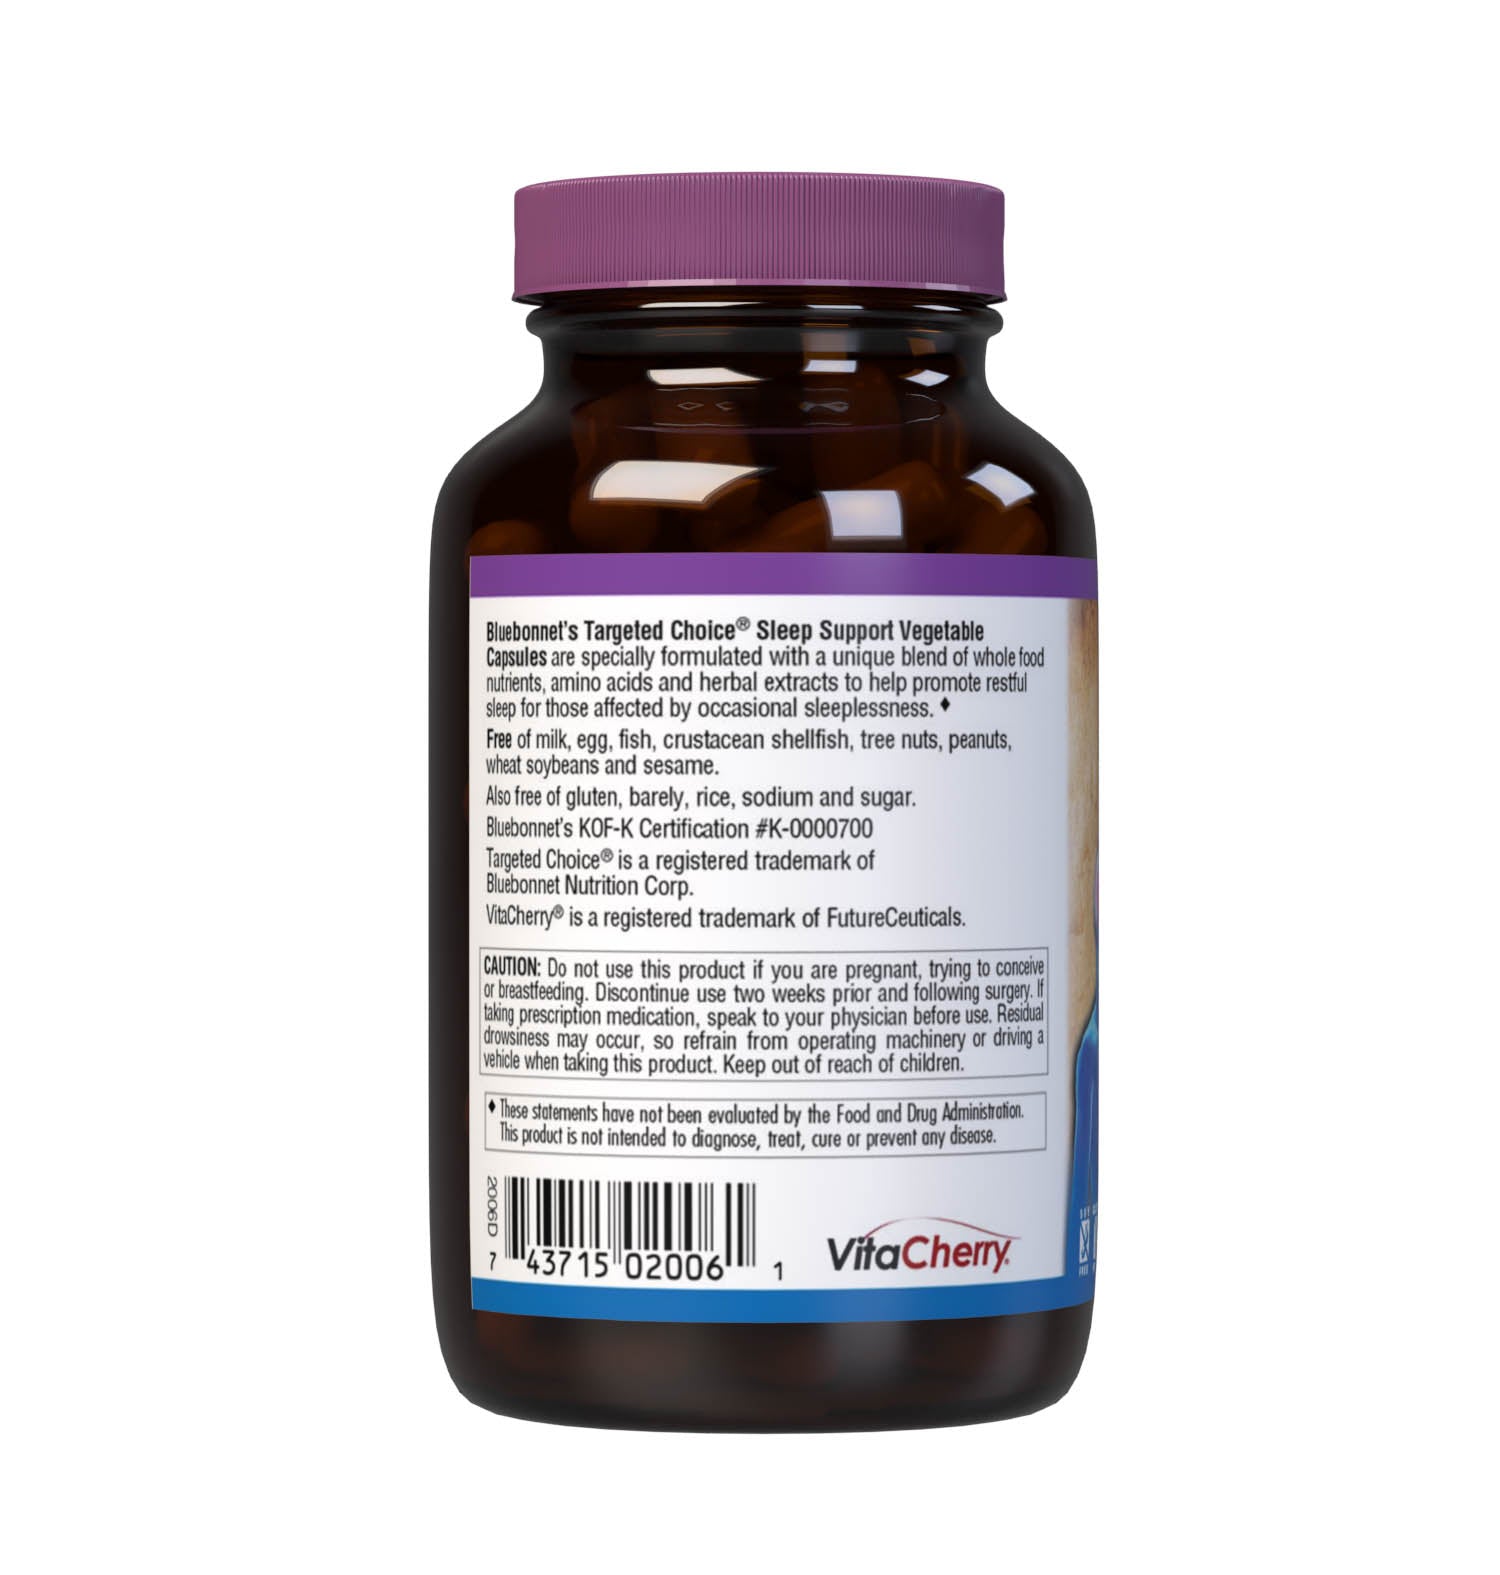 Bluebonnet’s Targeted Choice Sleep Support 60 Vegetable Capsules are specially formulated with a unique blend of whole food nutrients, amino acids and herbal extracts to help promote restful sleep for those affected by occasional sleeplessness. Description panel. #size_60 count